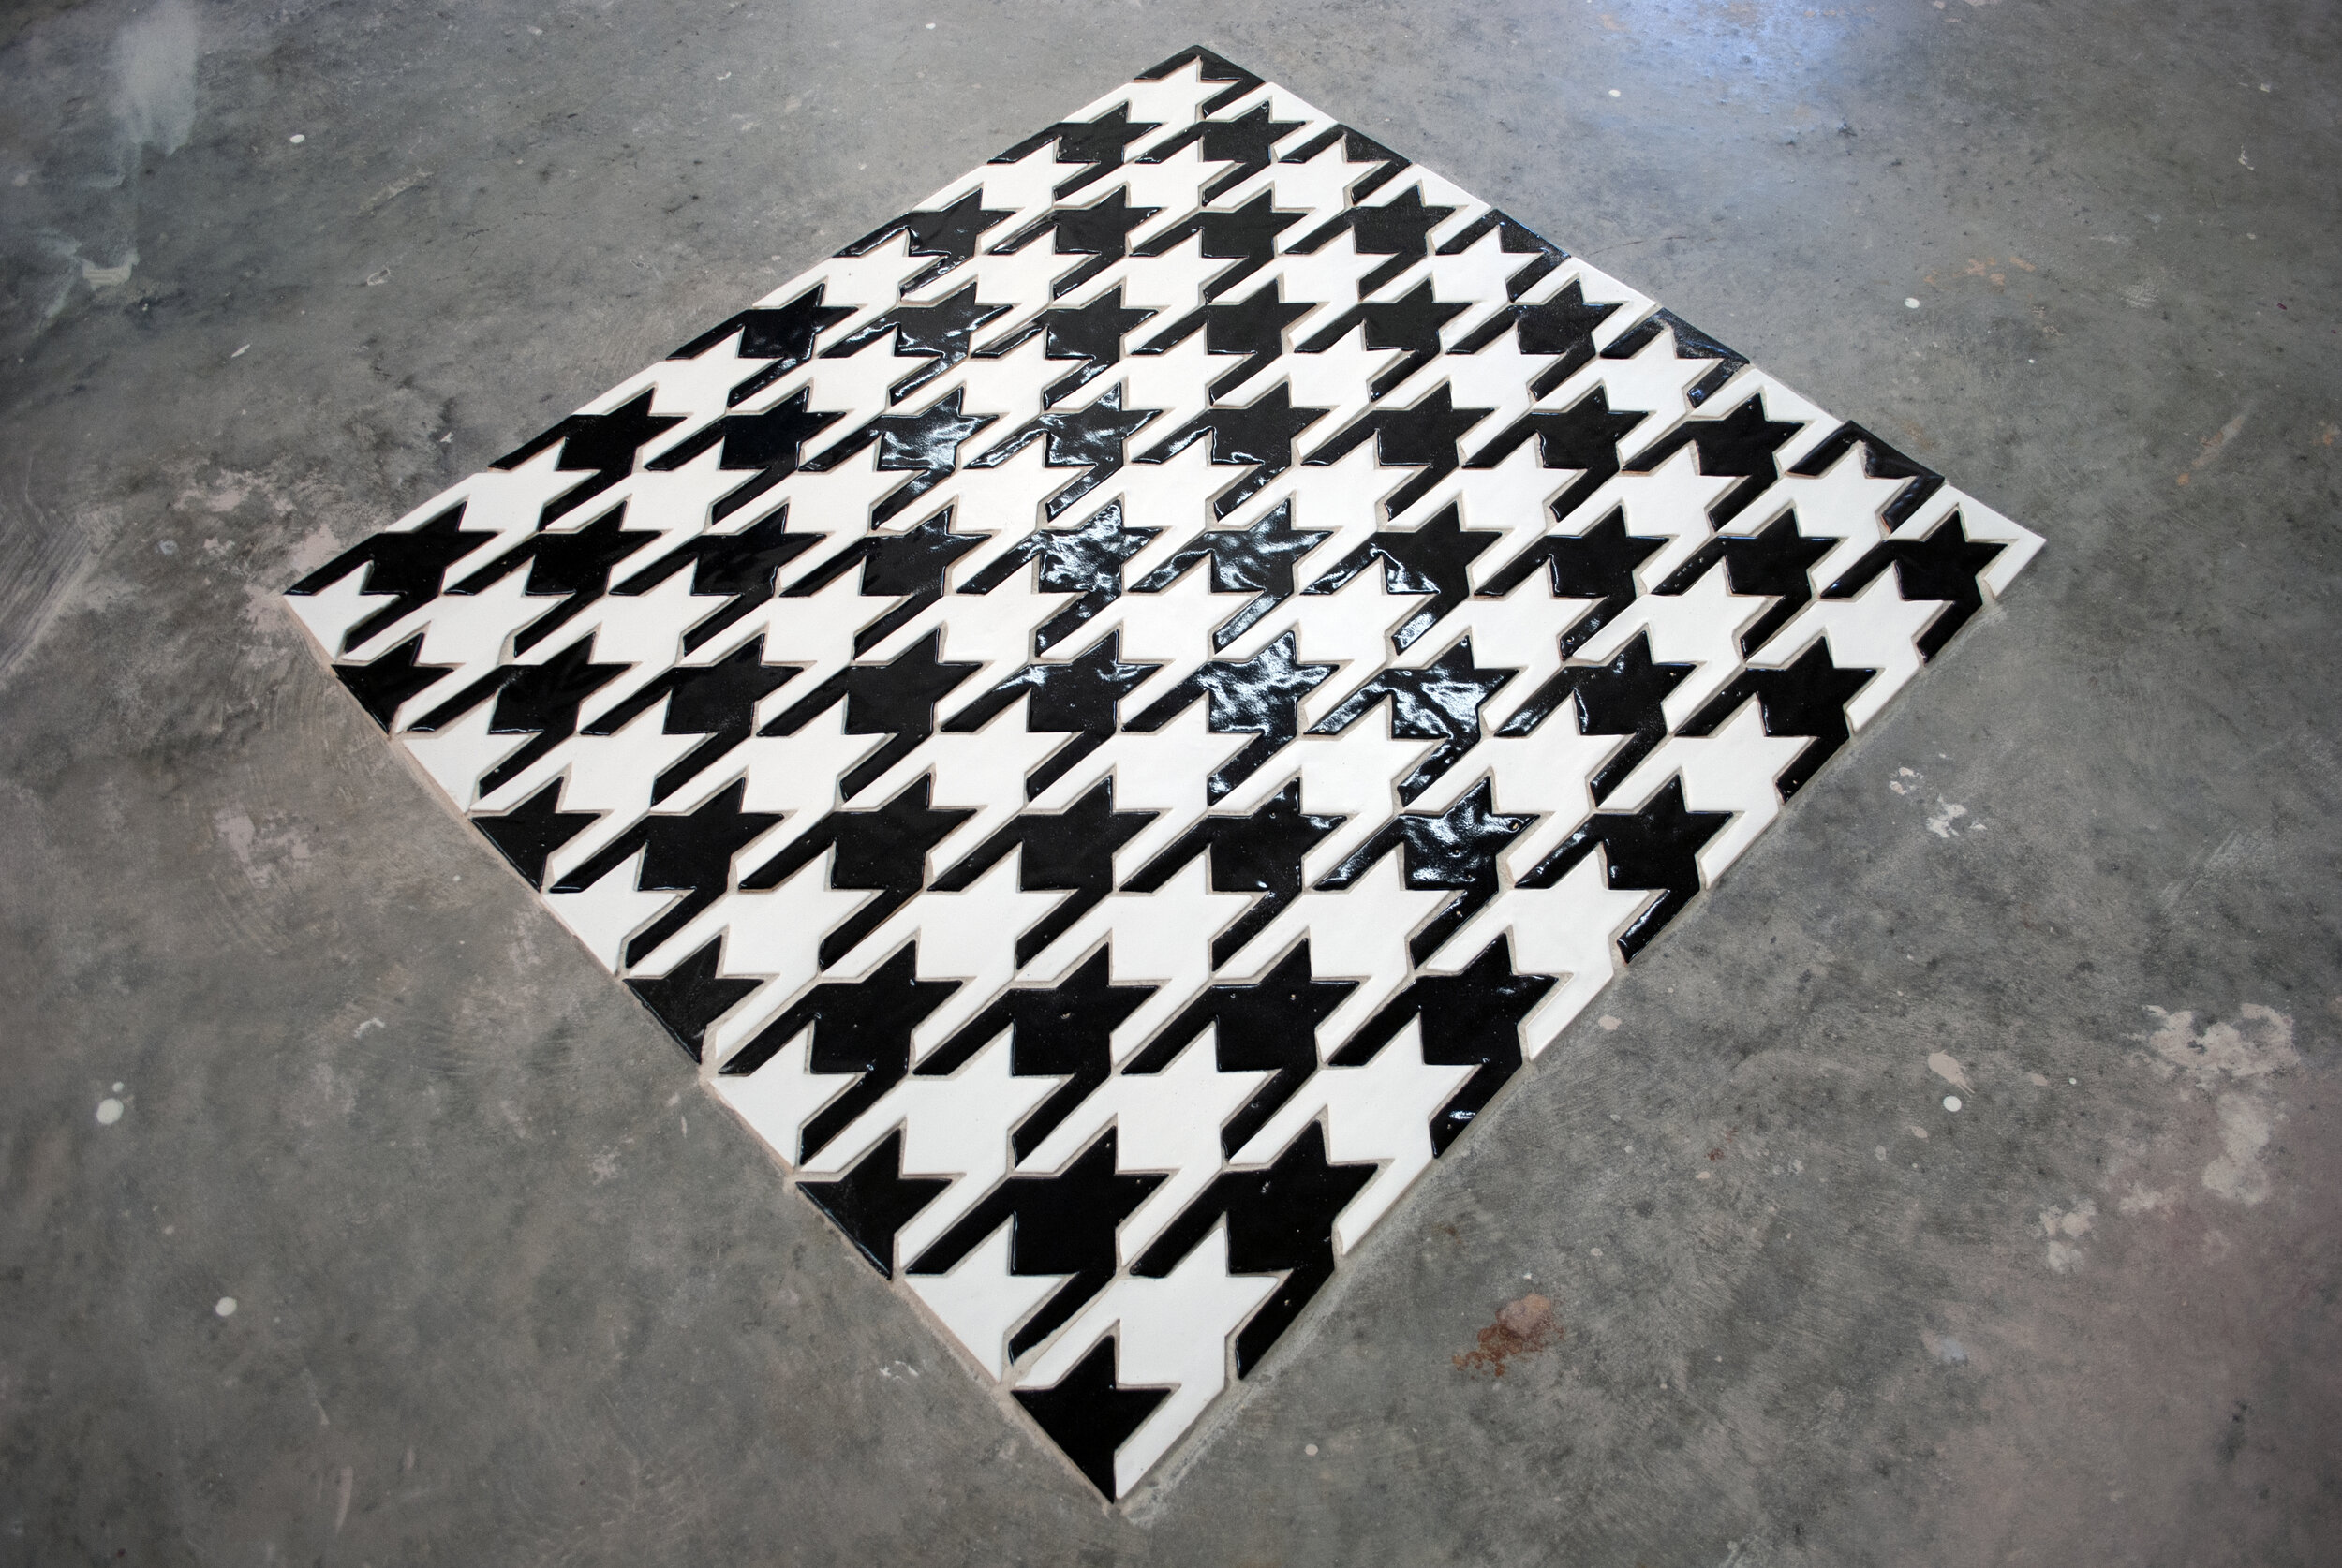  Houndstooth  Dimensions variable, Handmade ceramic tile, 2020 